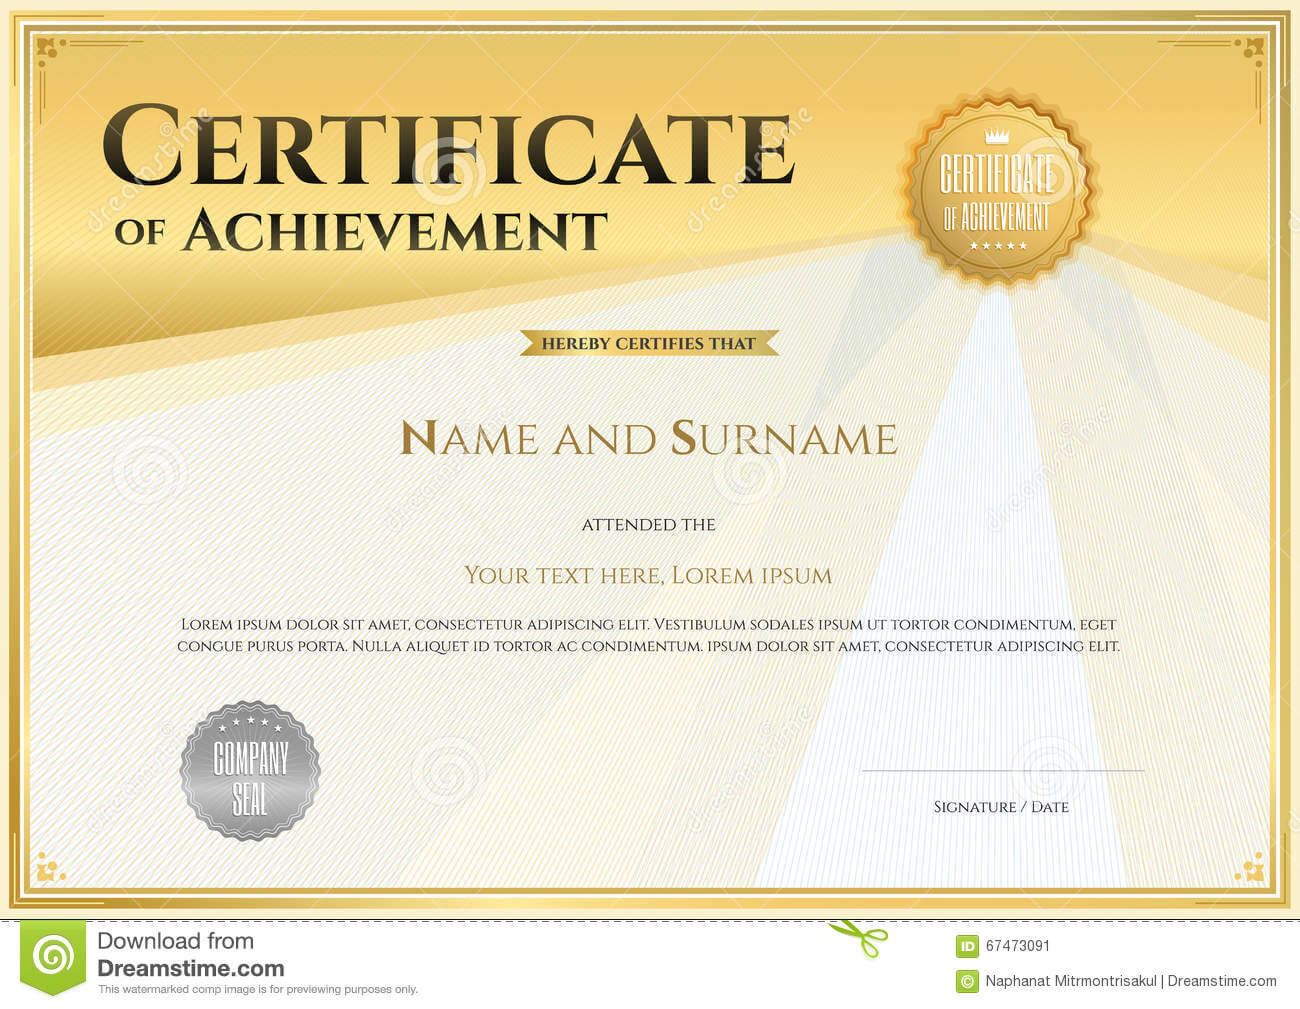 Certificate Template In Vector For Achievement Graduation Intended For Sales Certificate Template